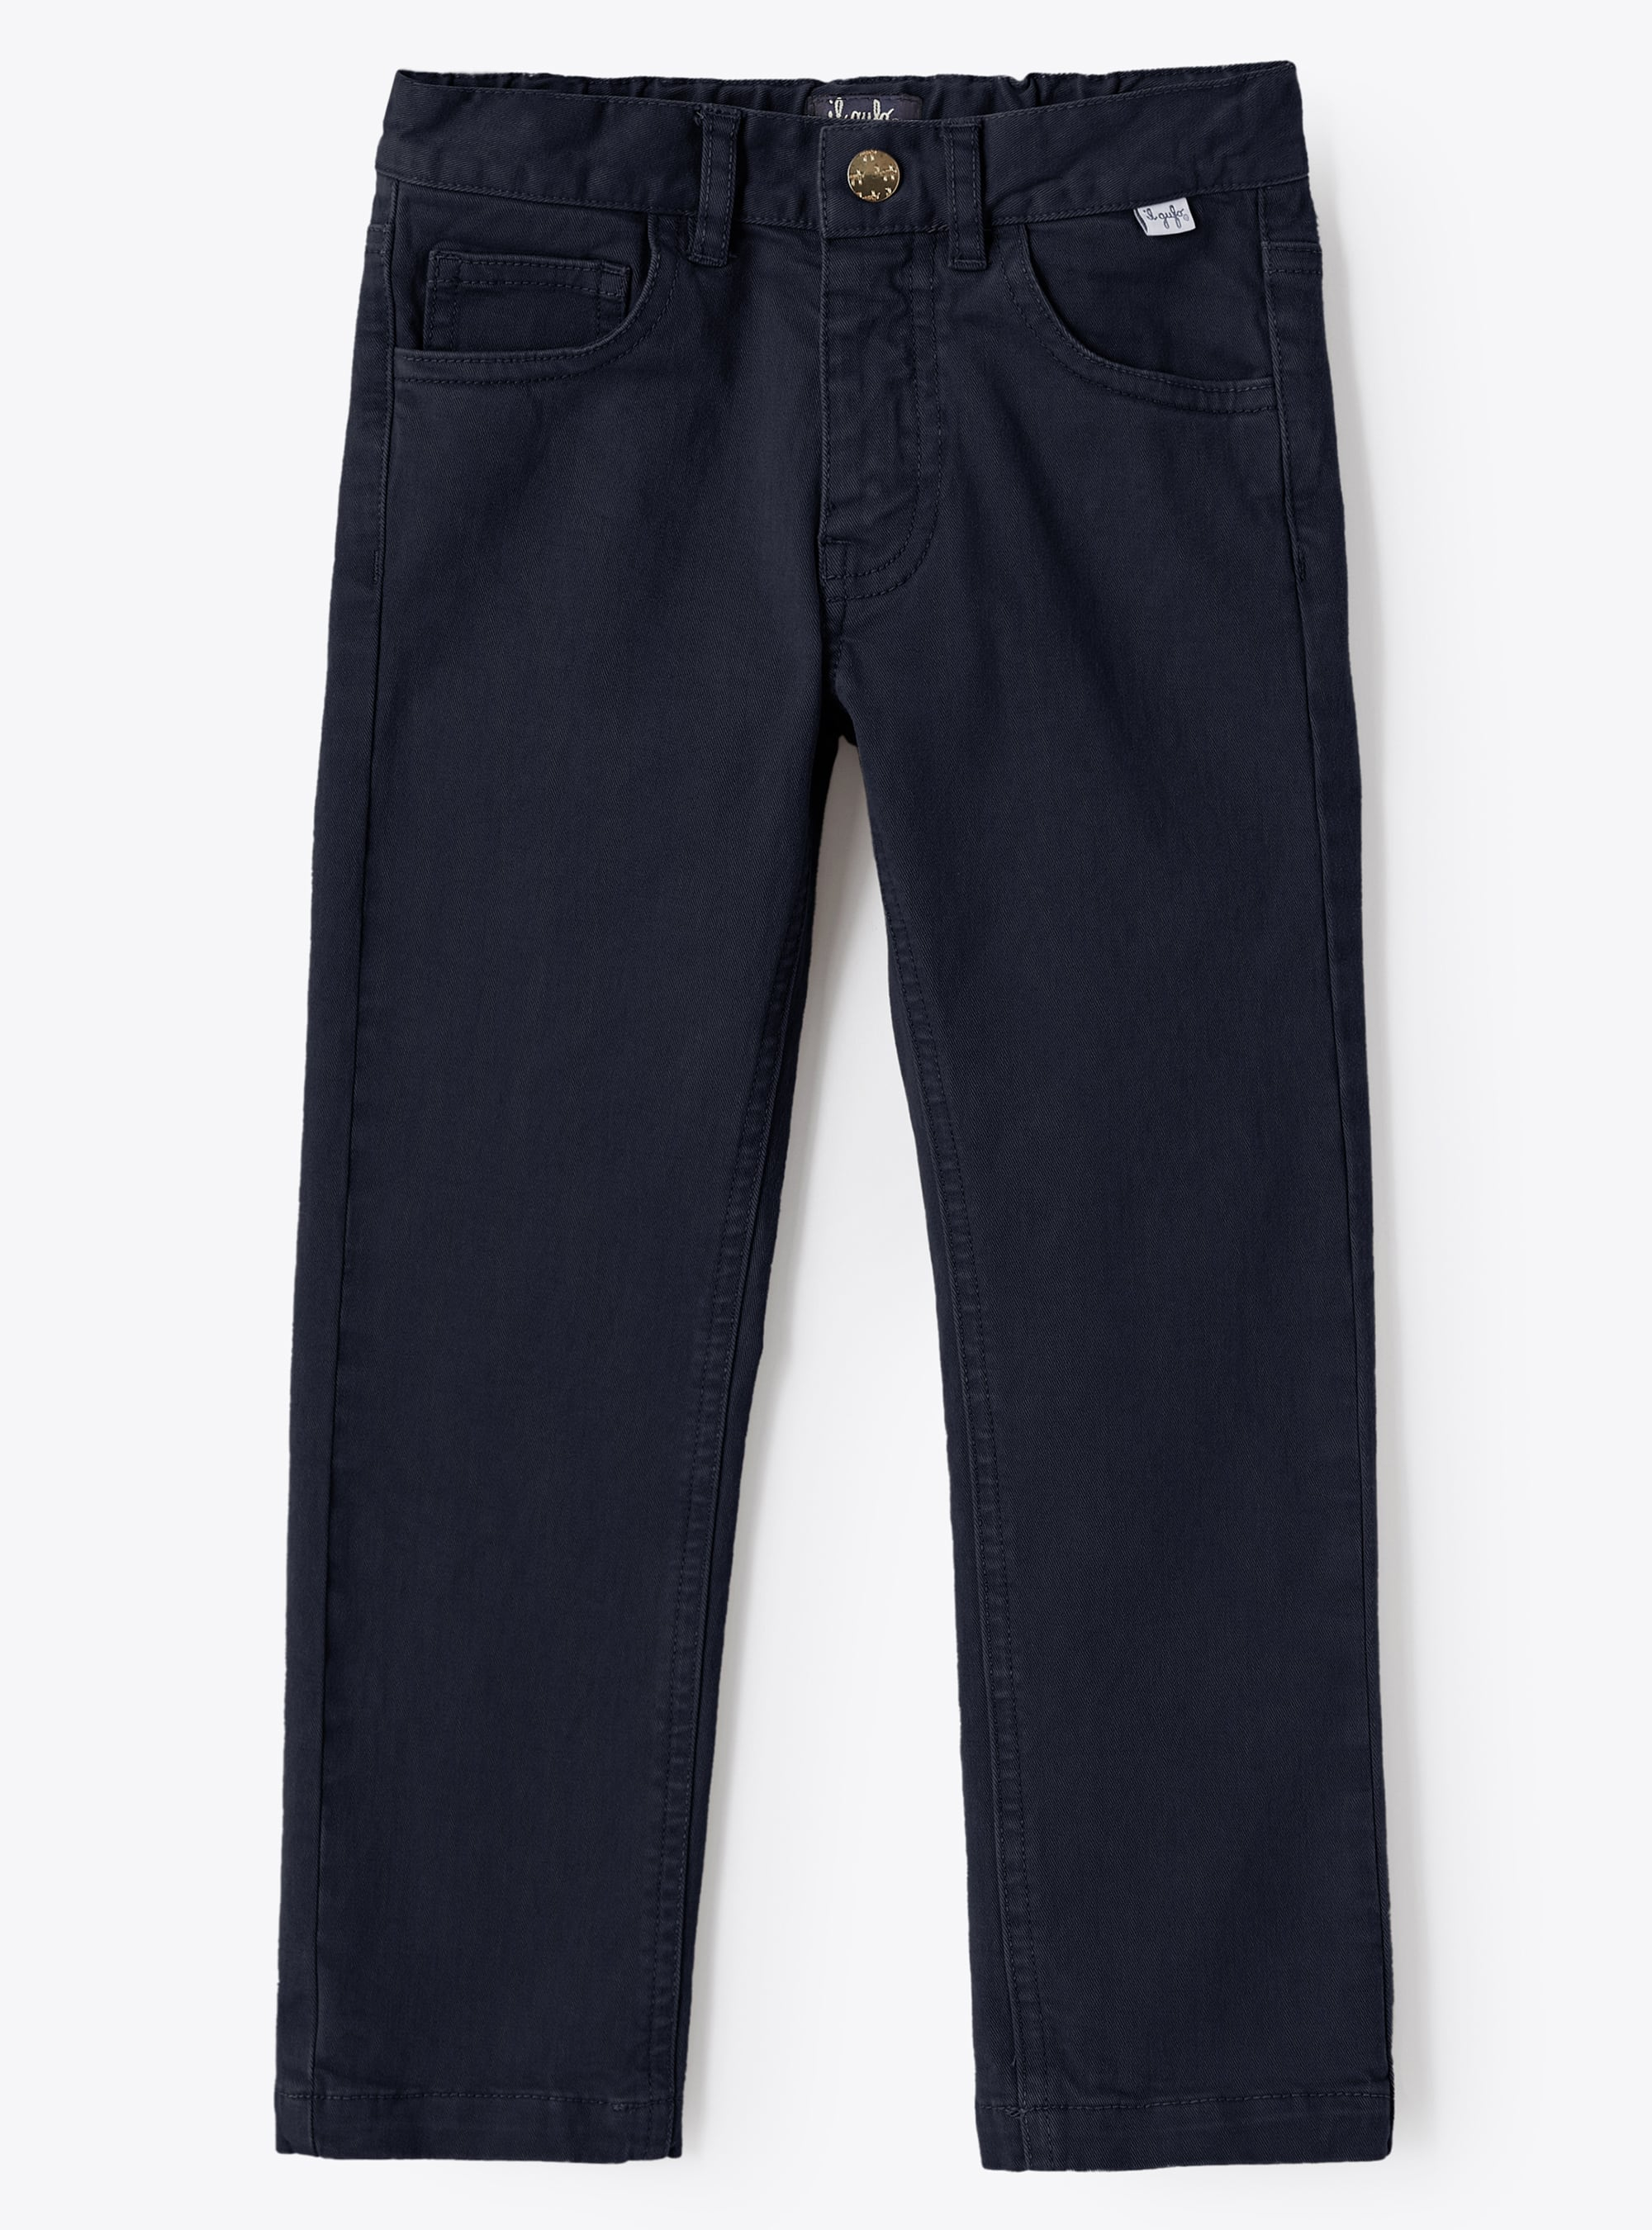 Regular fit navy cotton trousers - Trousers - Il Gufo